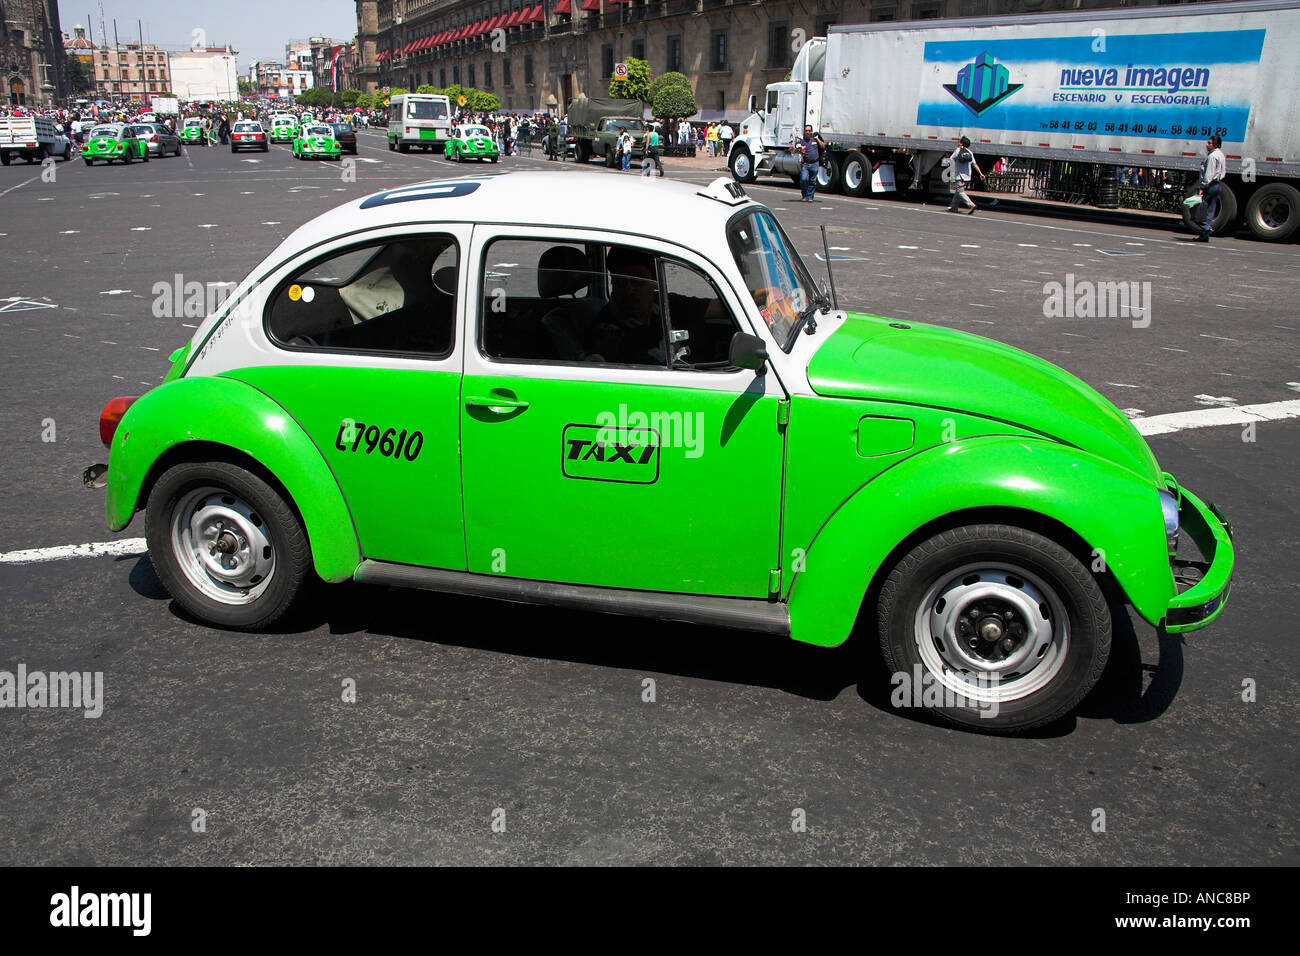 Bright green Volkswagen Beetle taxi in Mexico City Stock Photo